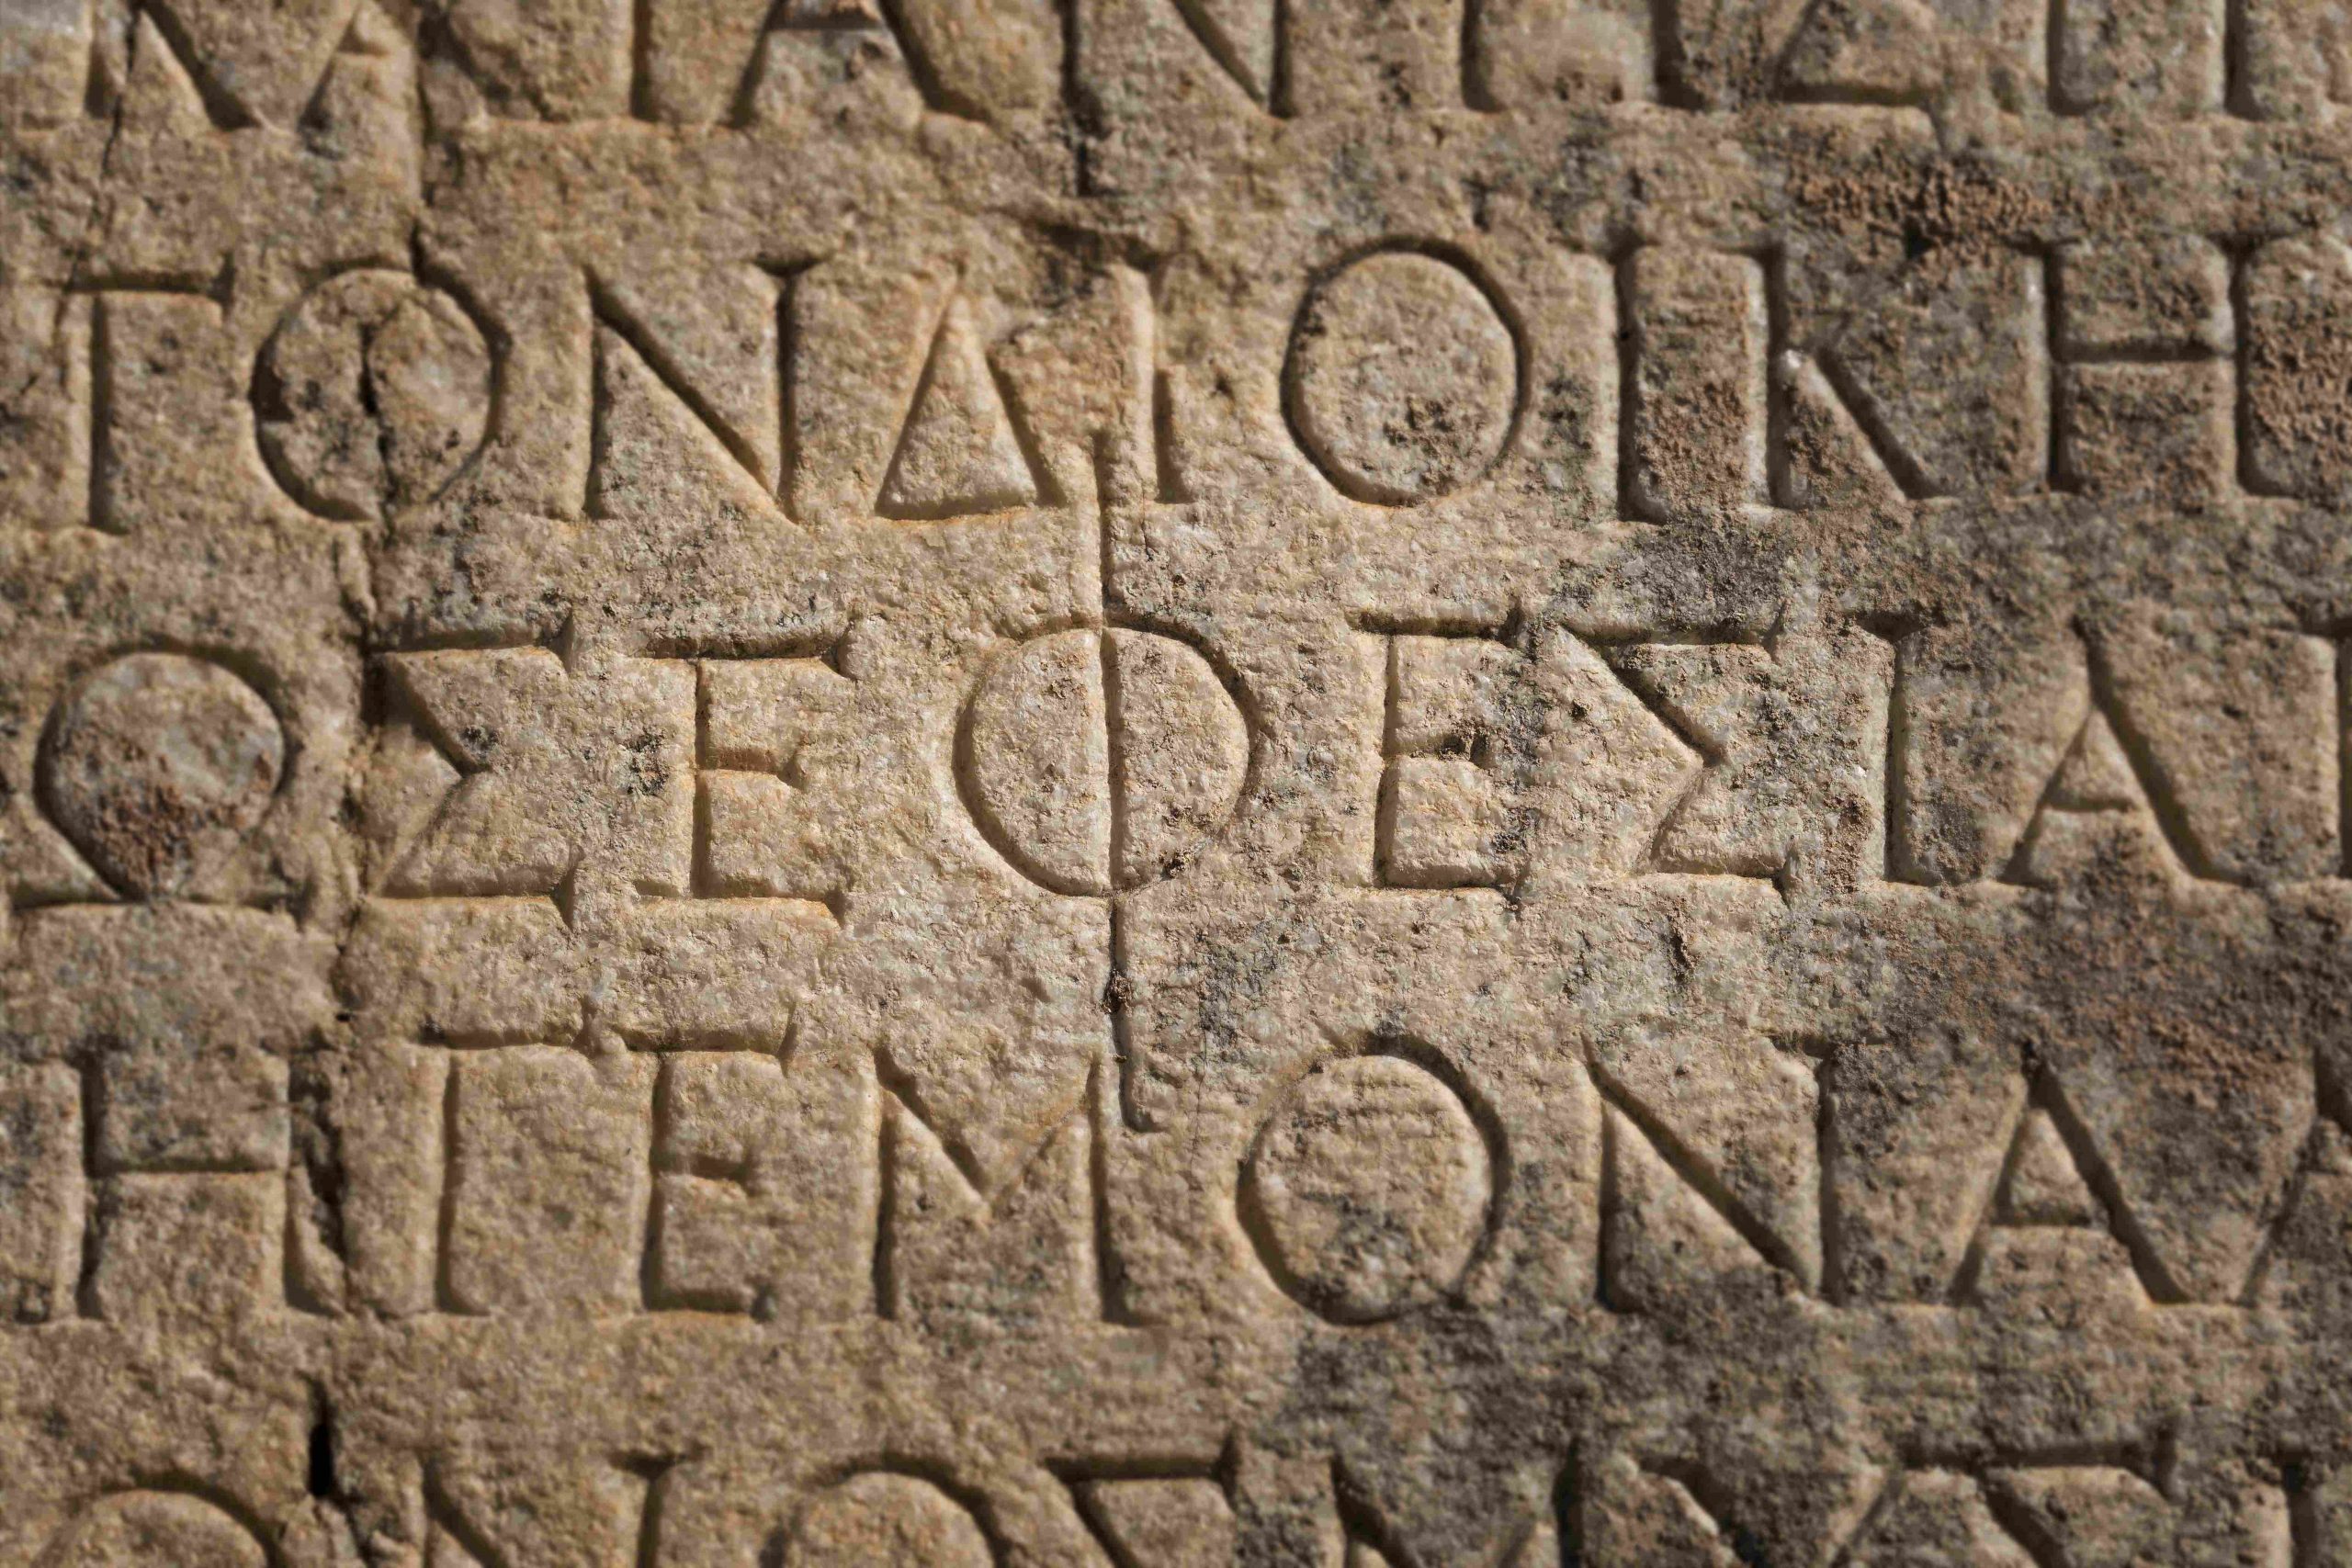 Sustaining Greek Language and Heritage Is a Universal Responsibility